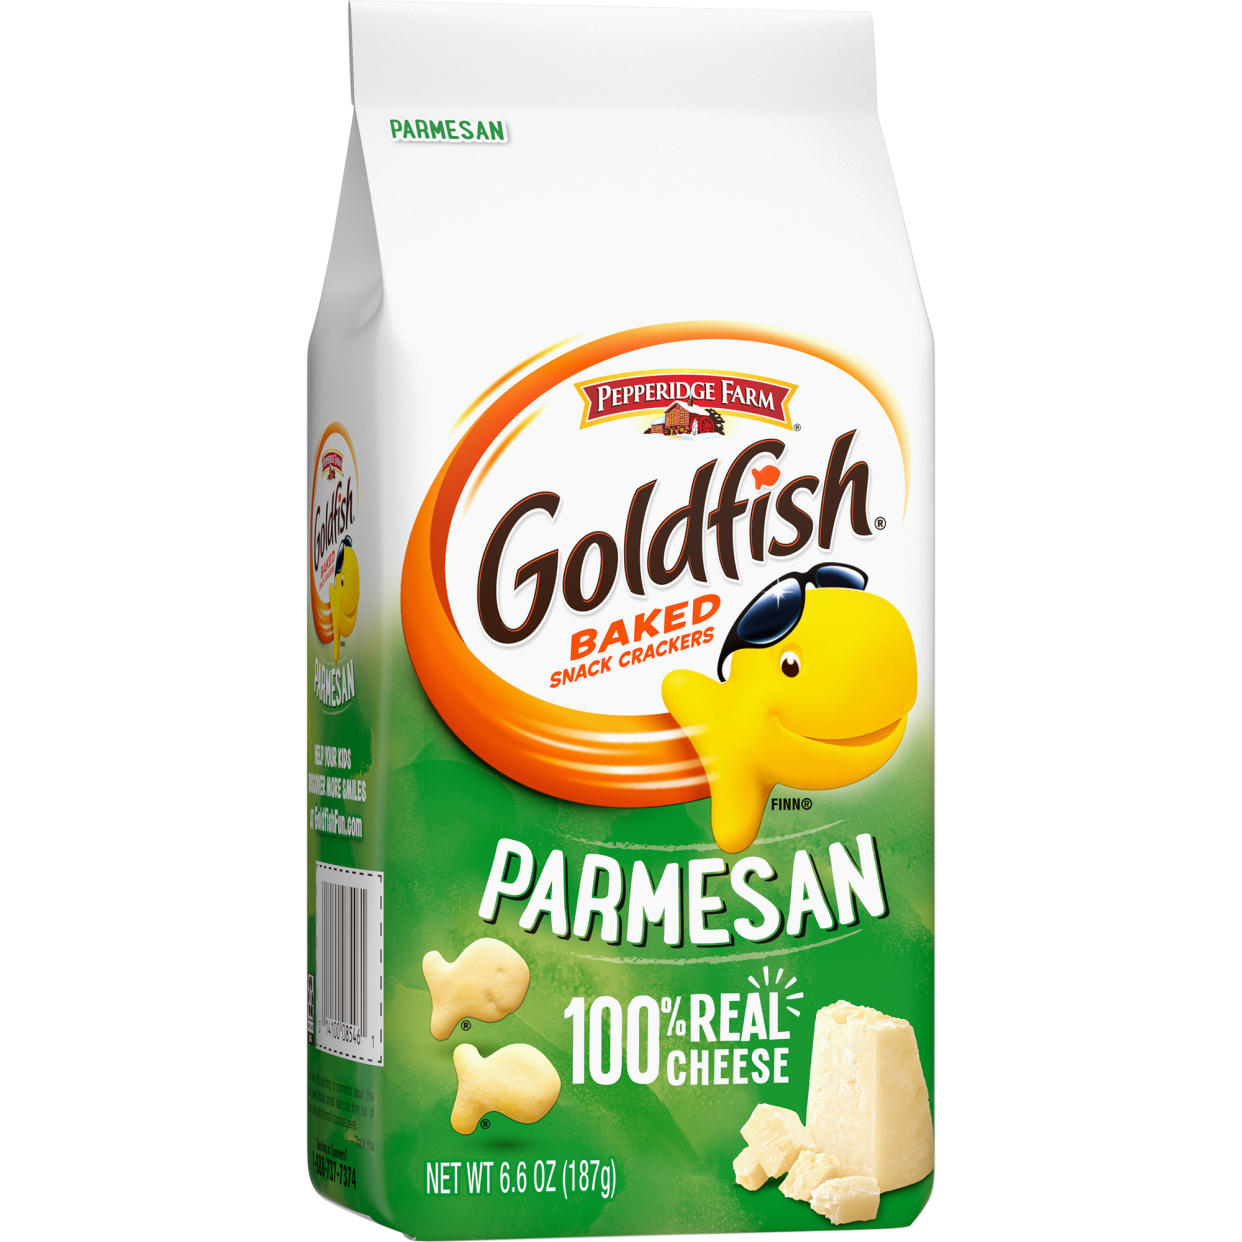 Parmesan Goldfish have a big bite of real Parmesan, but it's mostly at the tail-end. (Campbell's)